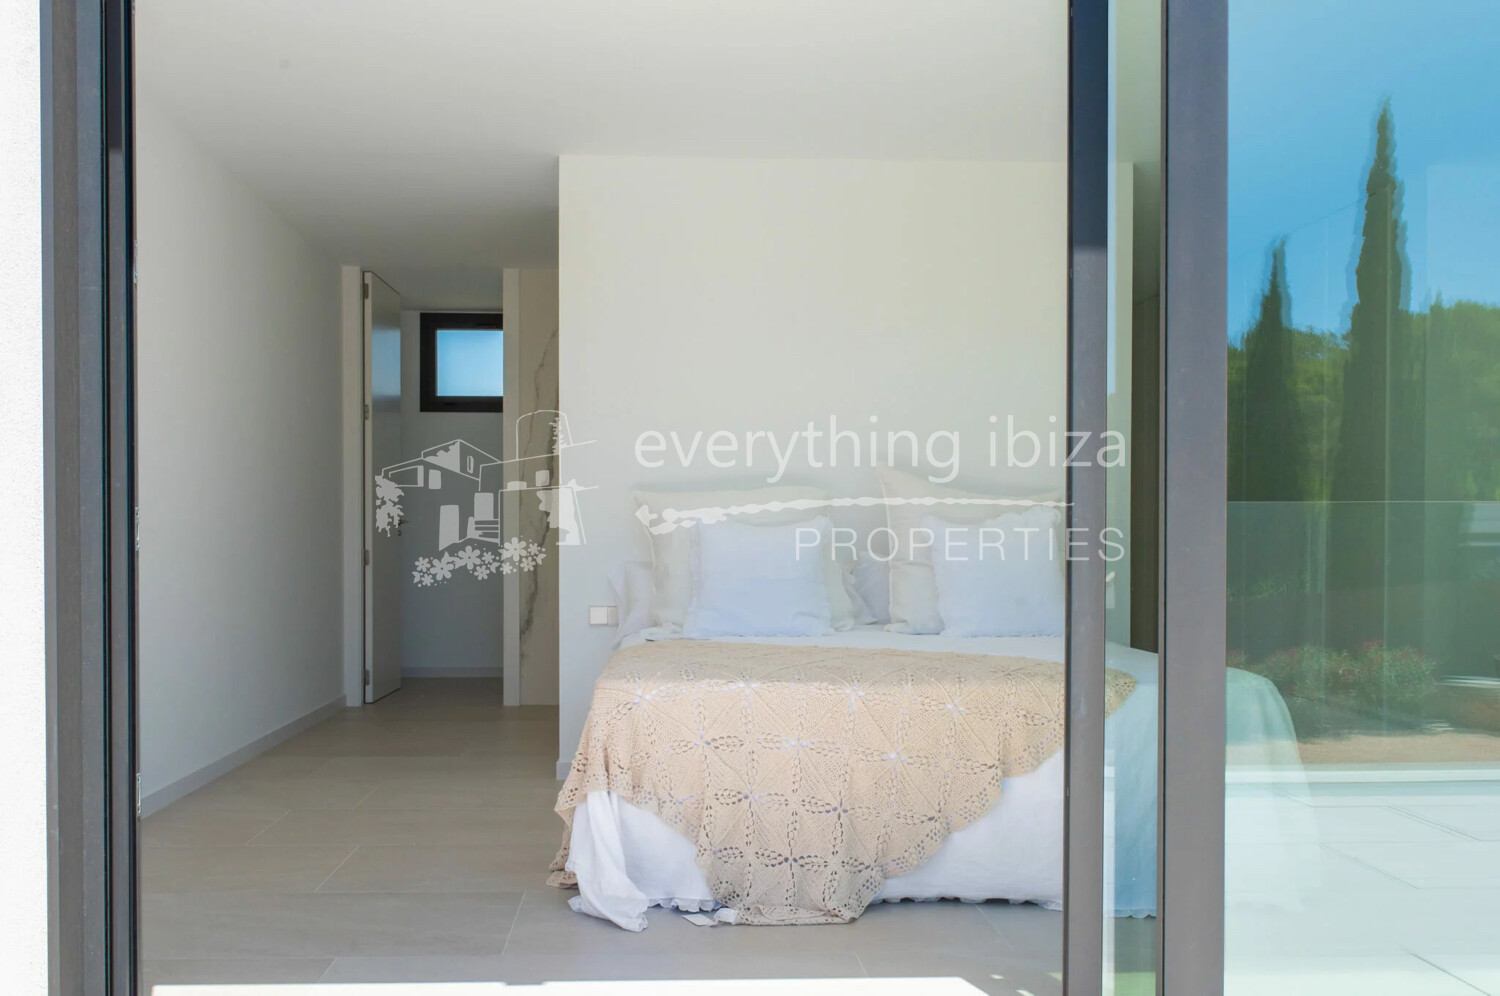 Luxurious New Villa with Two Pools Near Golf Course and Beach, ref. 1661, on sale in Ibiza by everything ibiza Properties